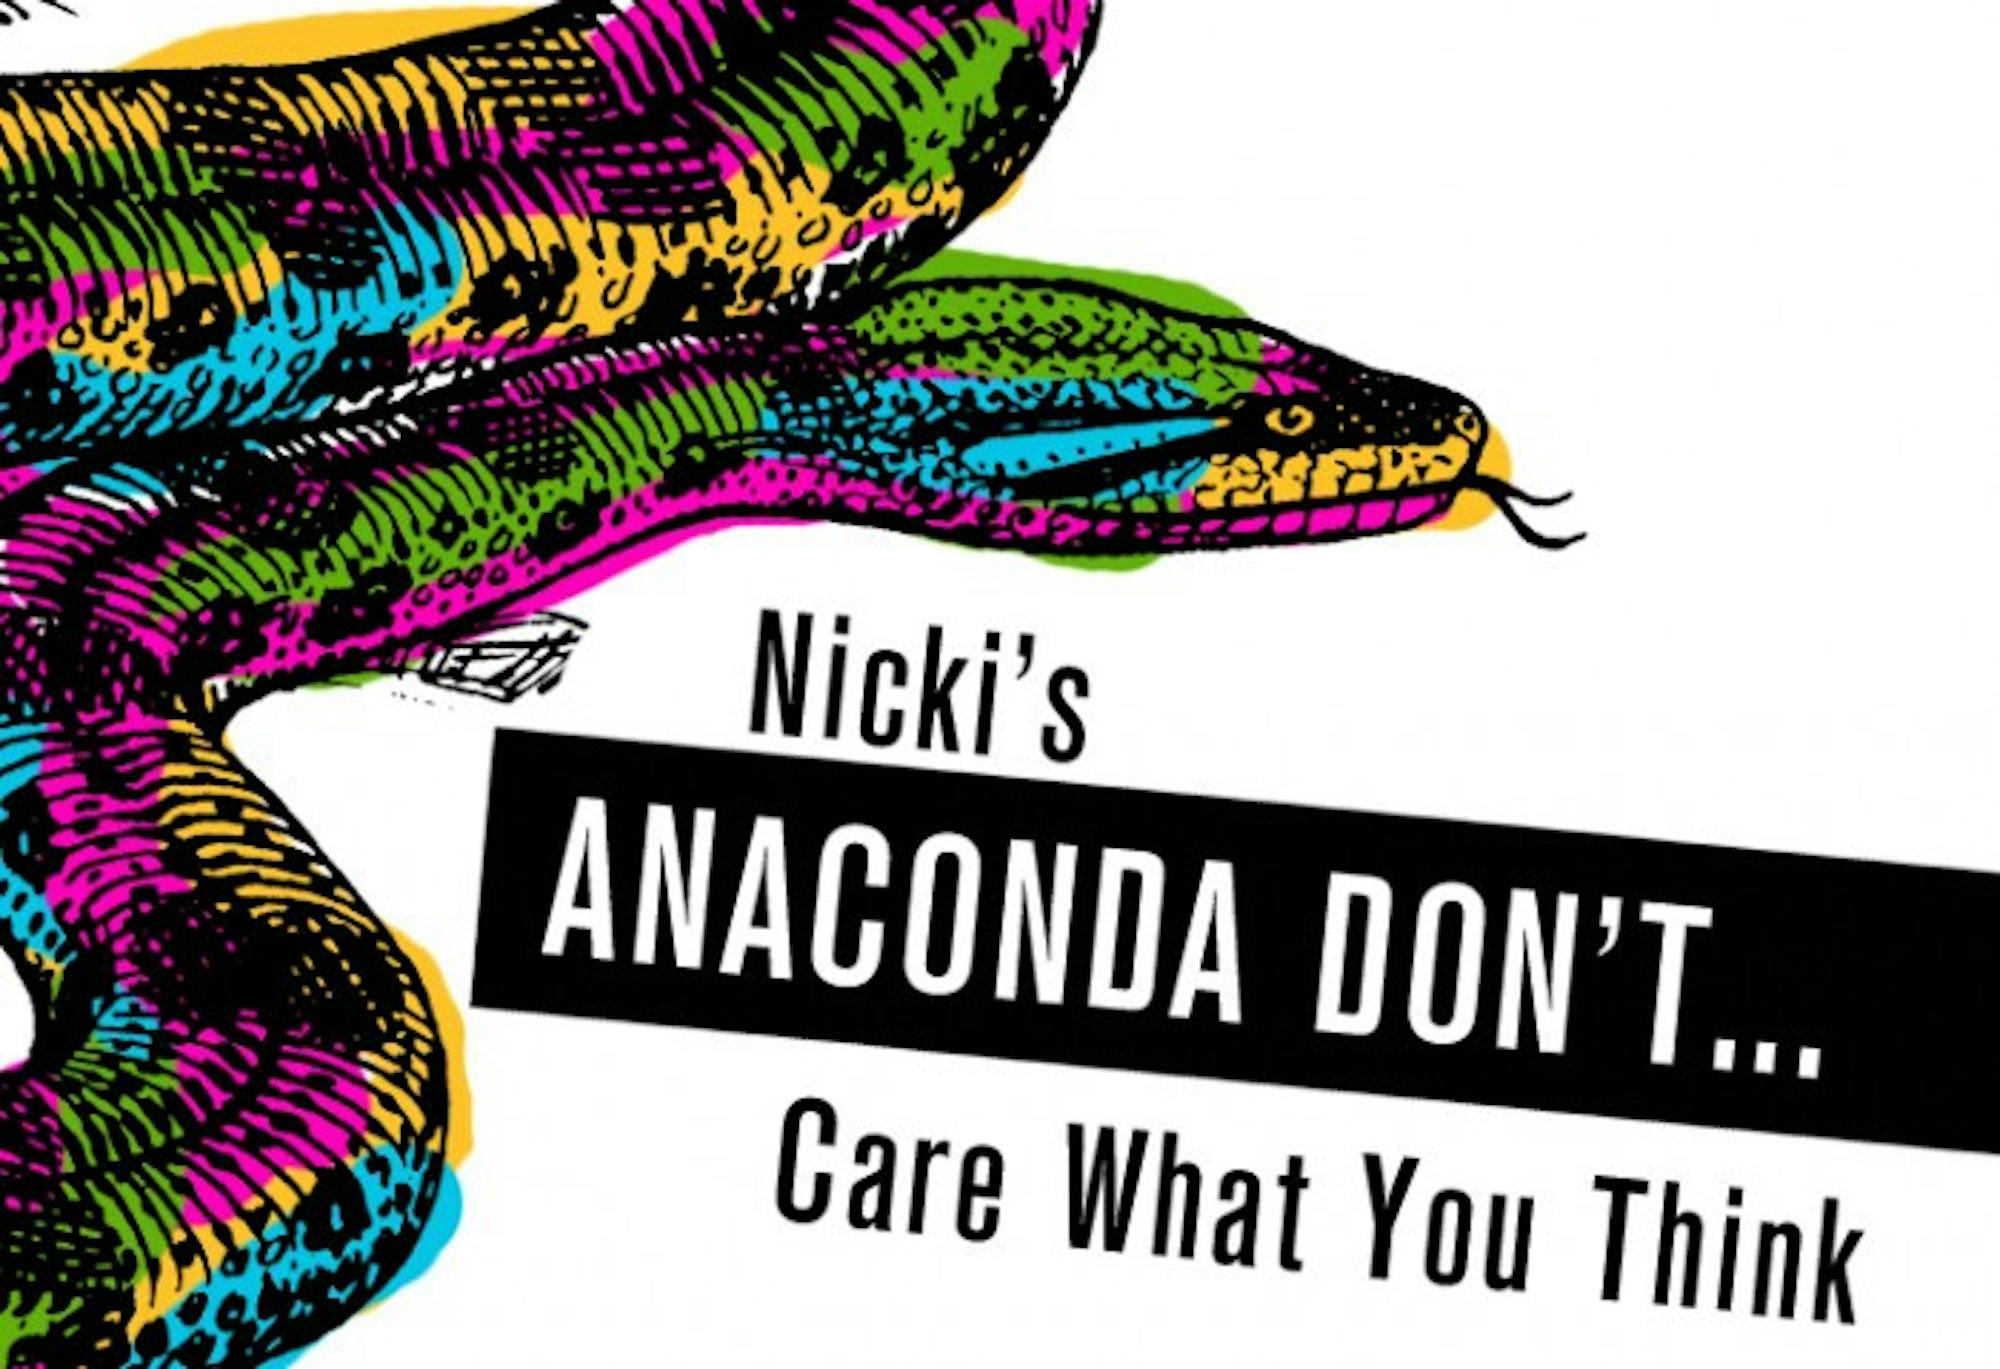 web_nicki's anaconda dont care what you think